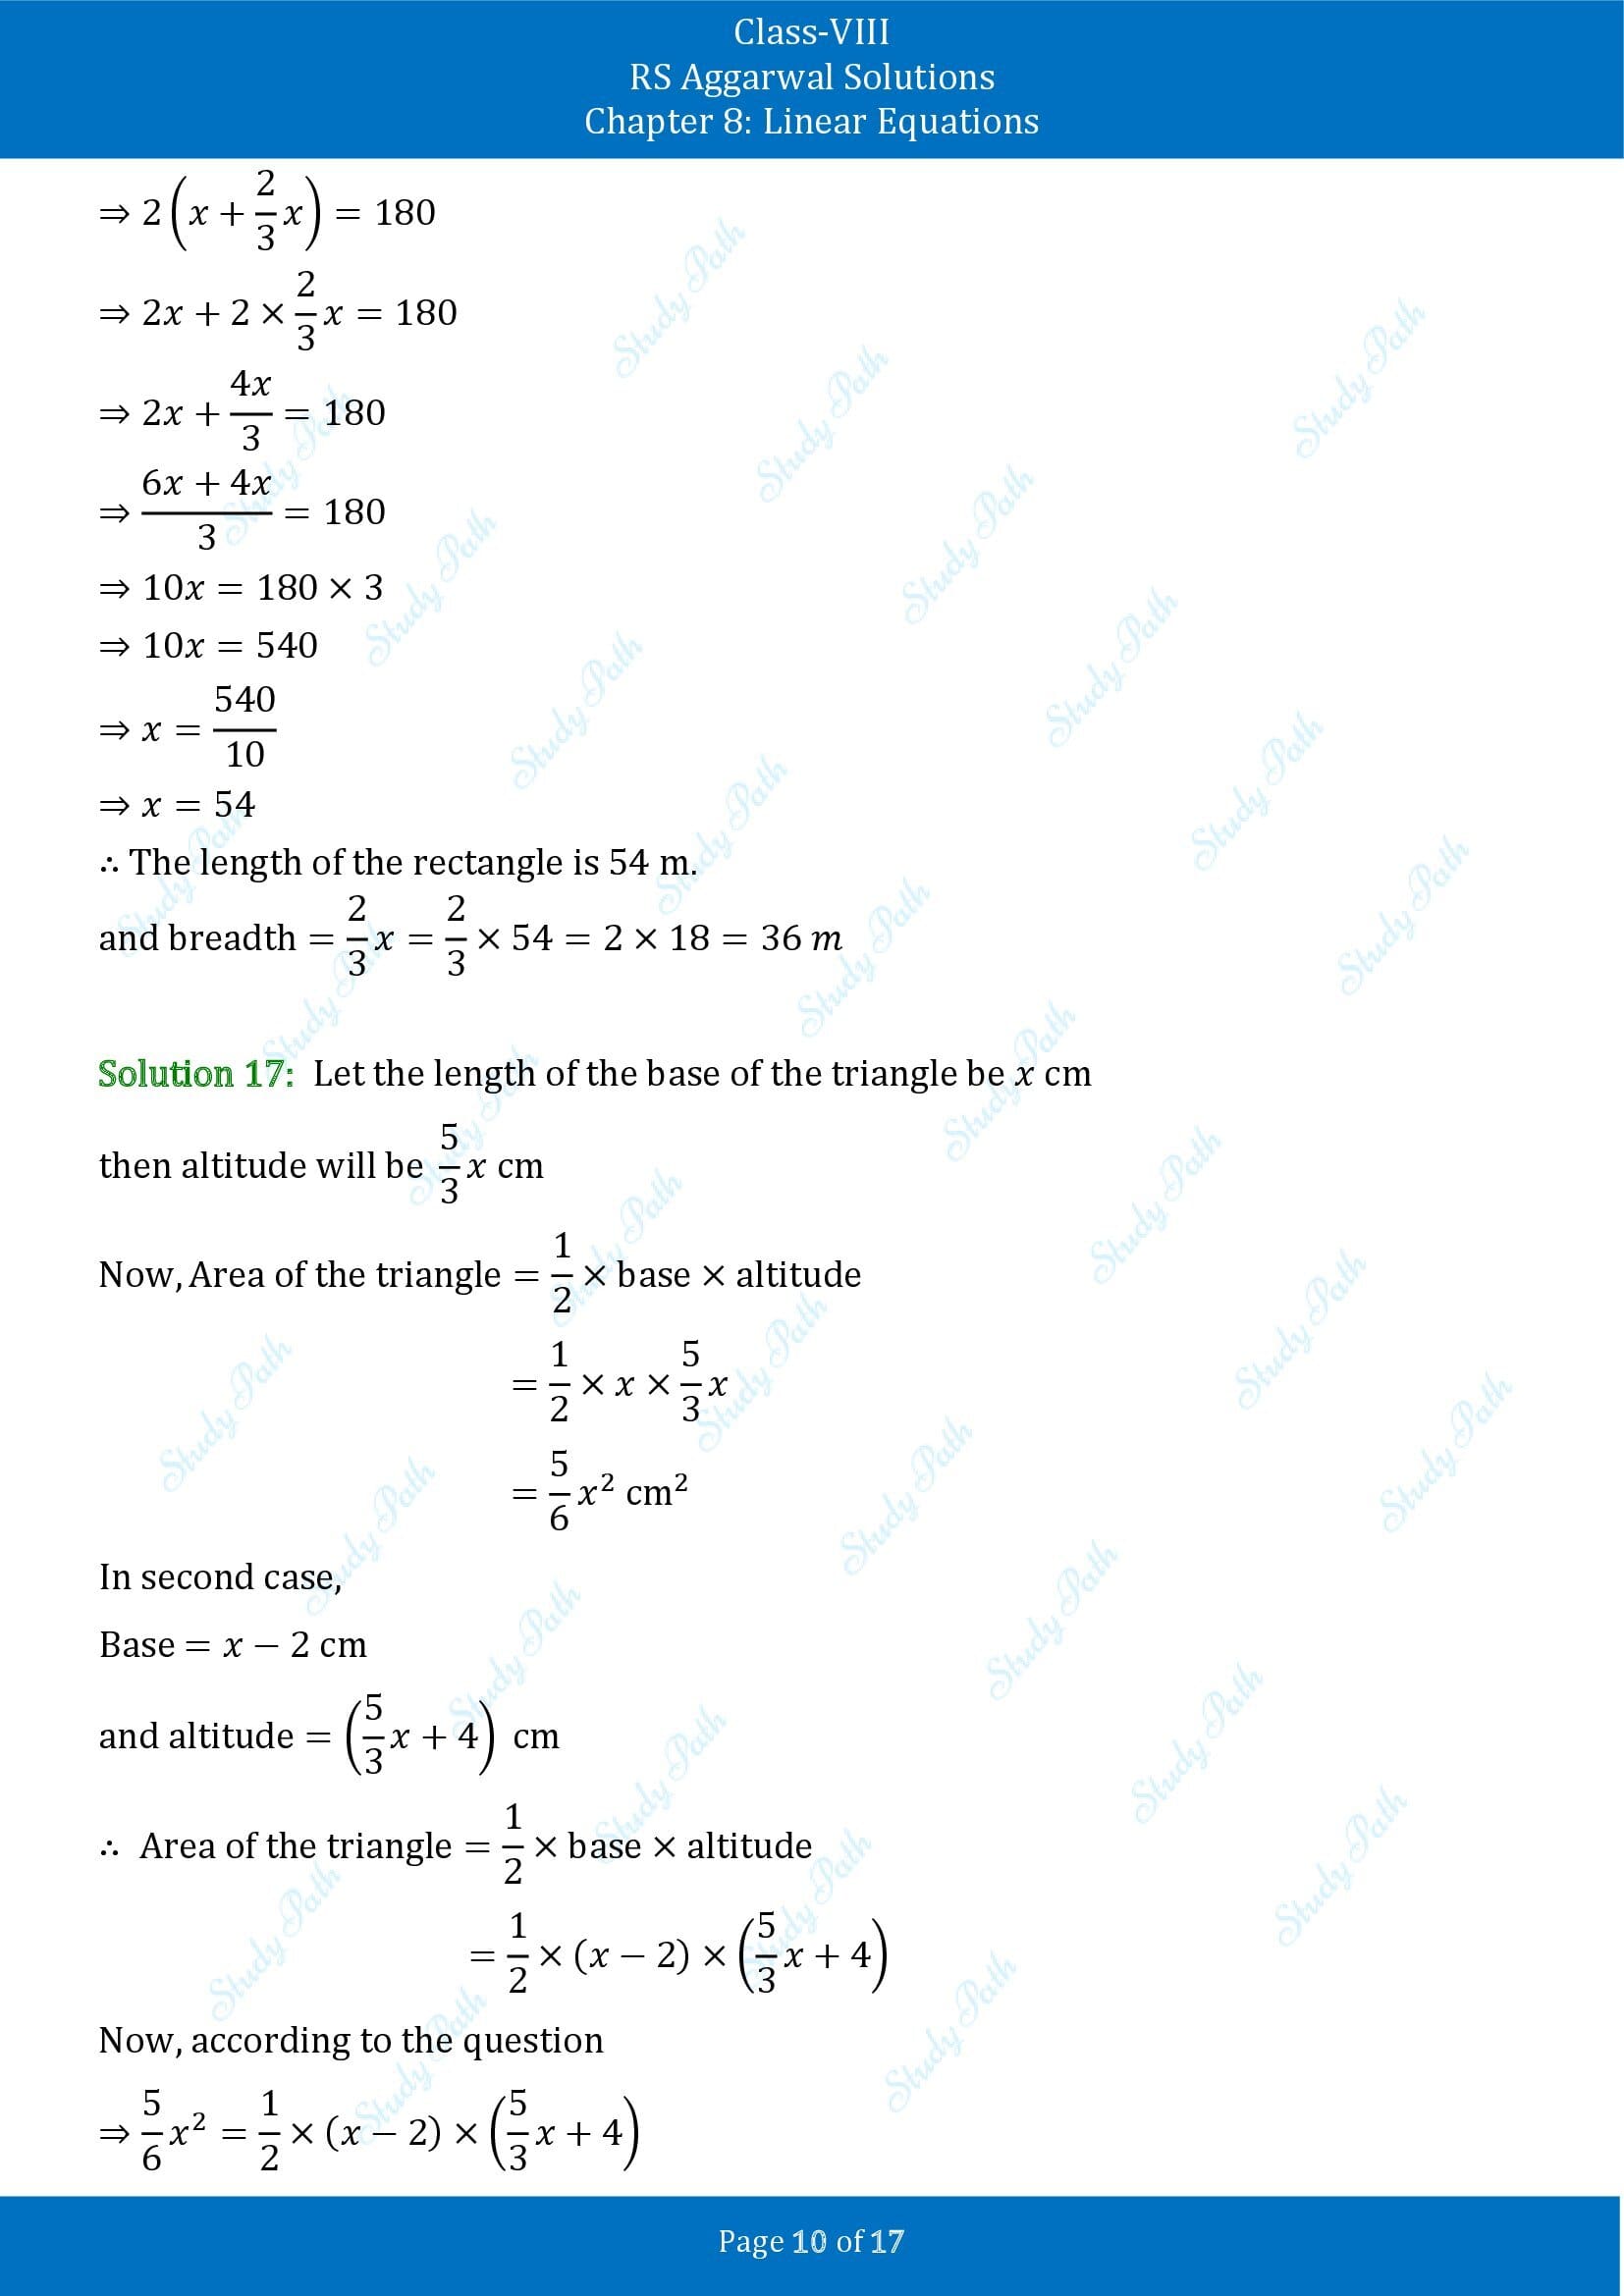 RS Aggarwal Solutions Class 8 Chapter 8 Linear Equations Exercise 8B 00010